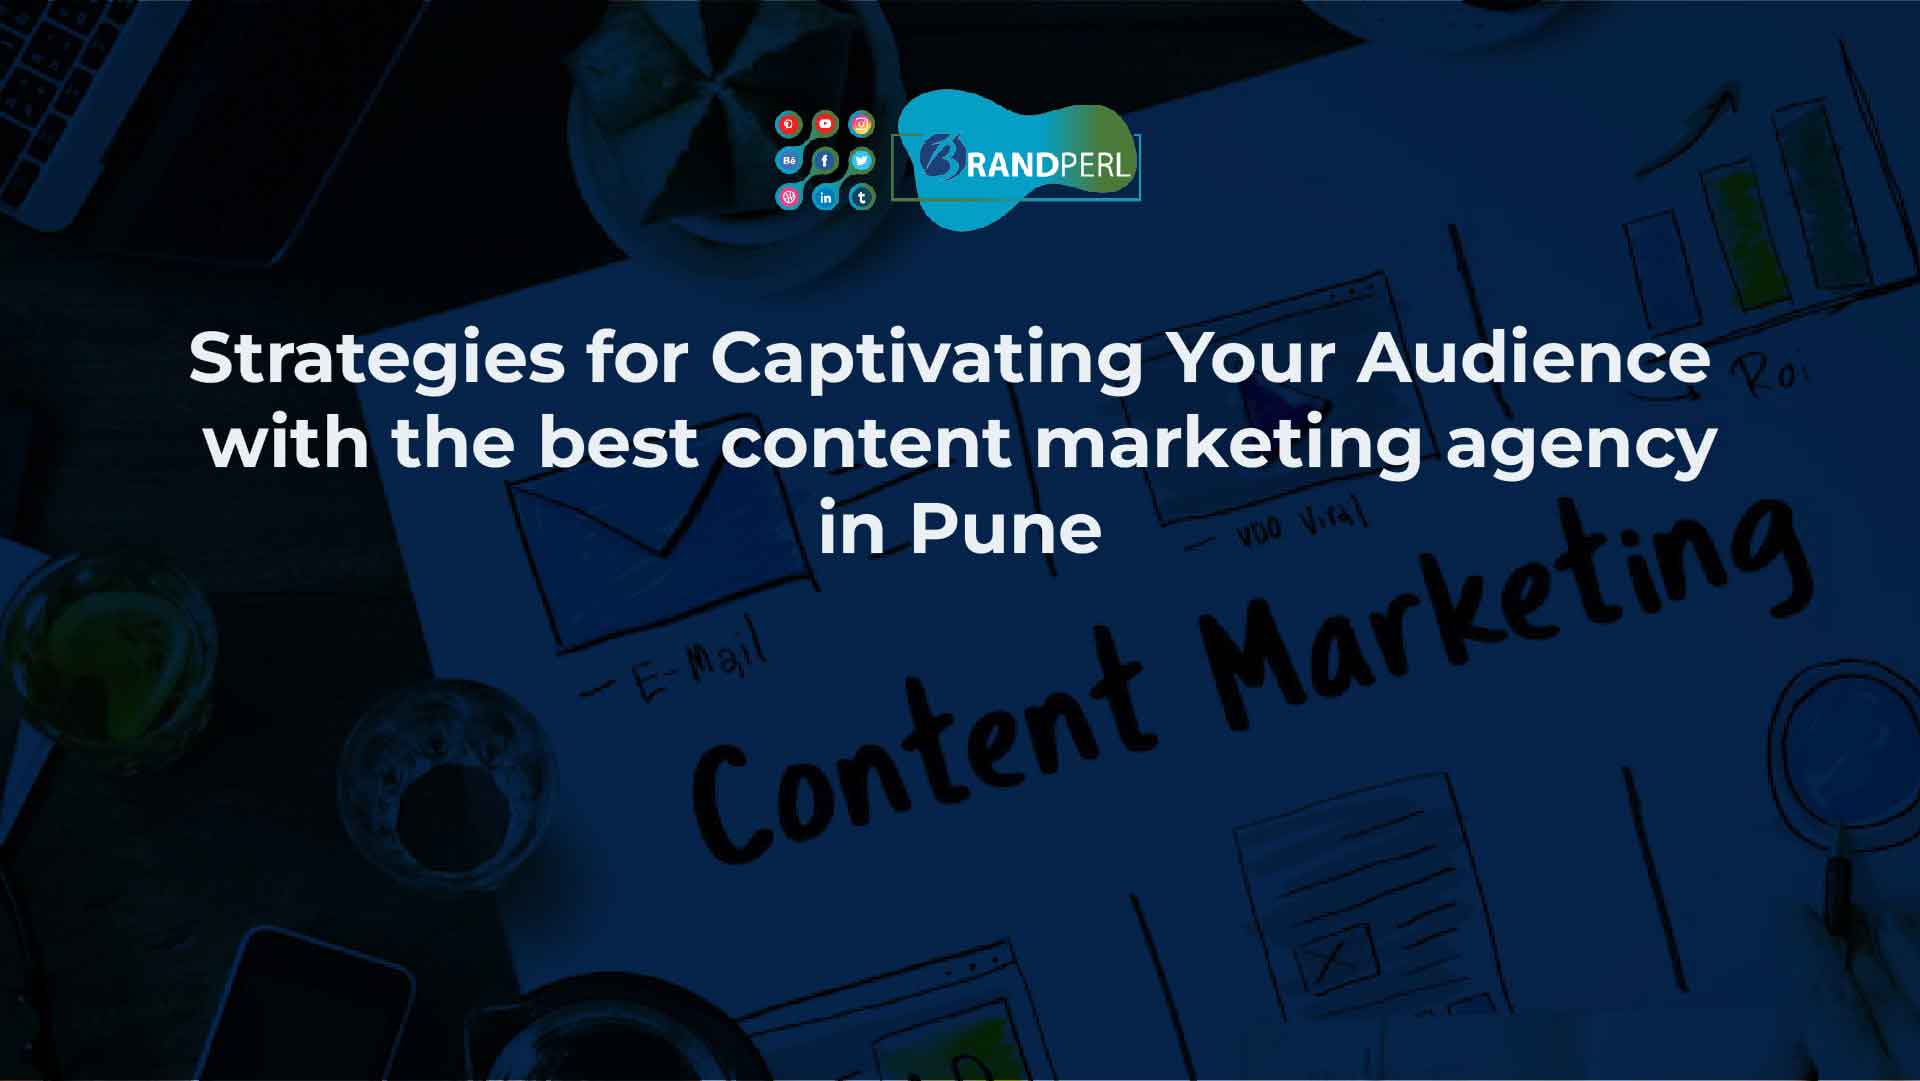 Strategies for Captivating Your Audience with the best content marketing agency in Pune